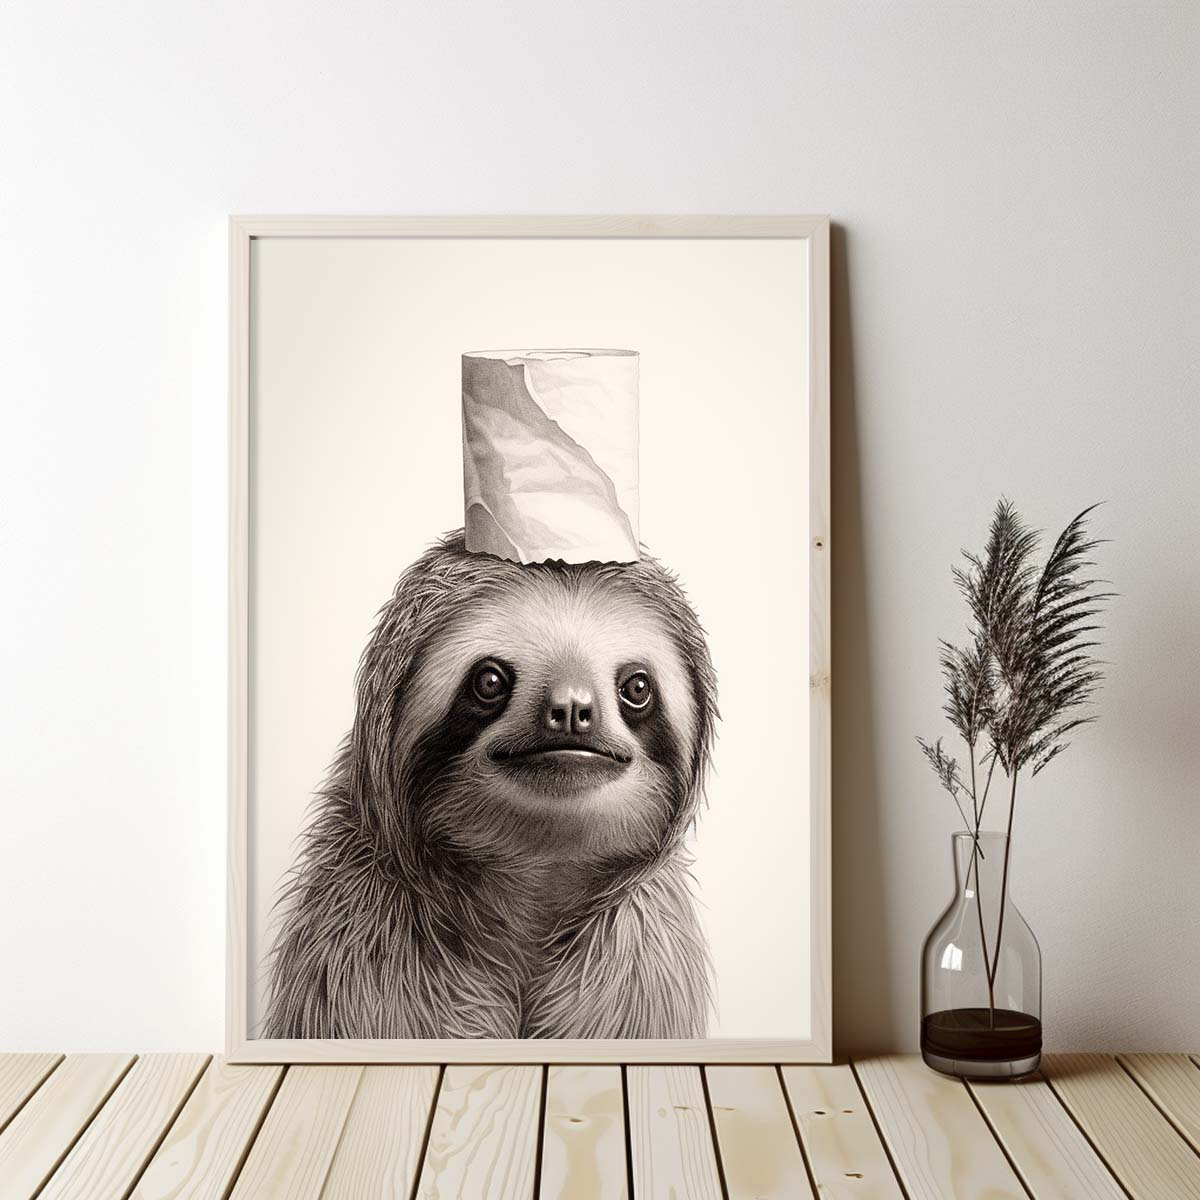 Sloth 02 With Toilet Paper Canvas Art, Sloth With Toilet Paper, Funny Sloth Art, Bathroom Wall Decor, Home Decor, Bathroom Wall Art, Animal Wall Decor, Animal Decor, Animal Gift